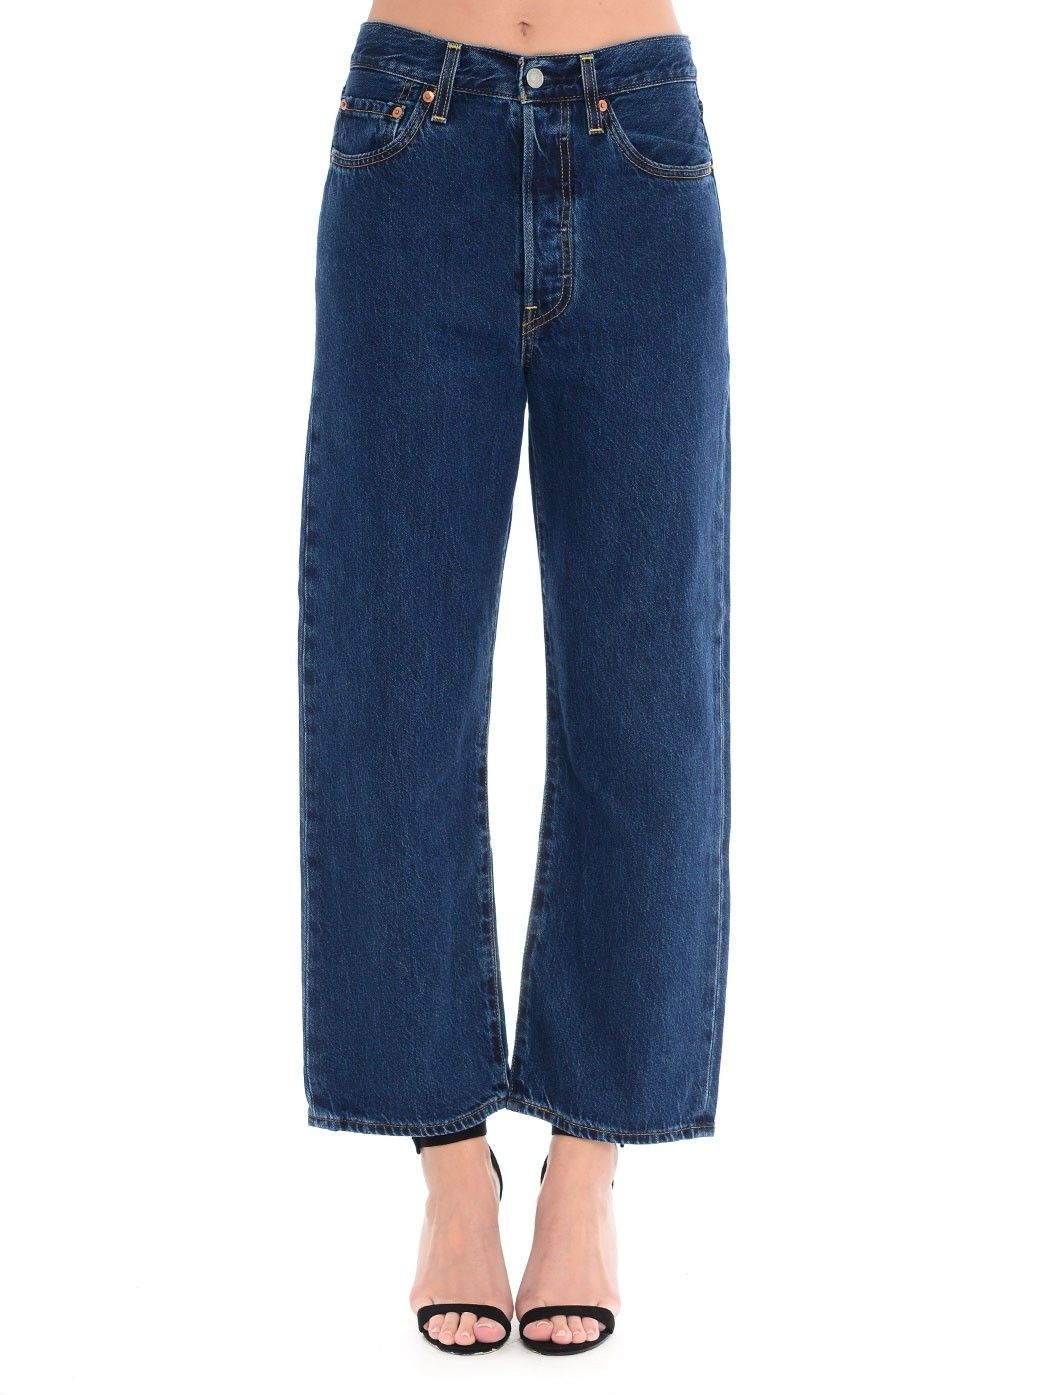  WOMENSWEAR,SPRING SUMMER COLLECTION  LEVI'S 72693